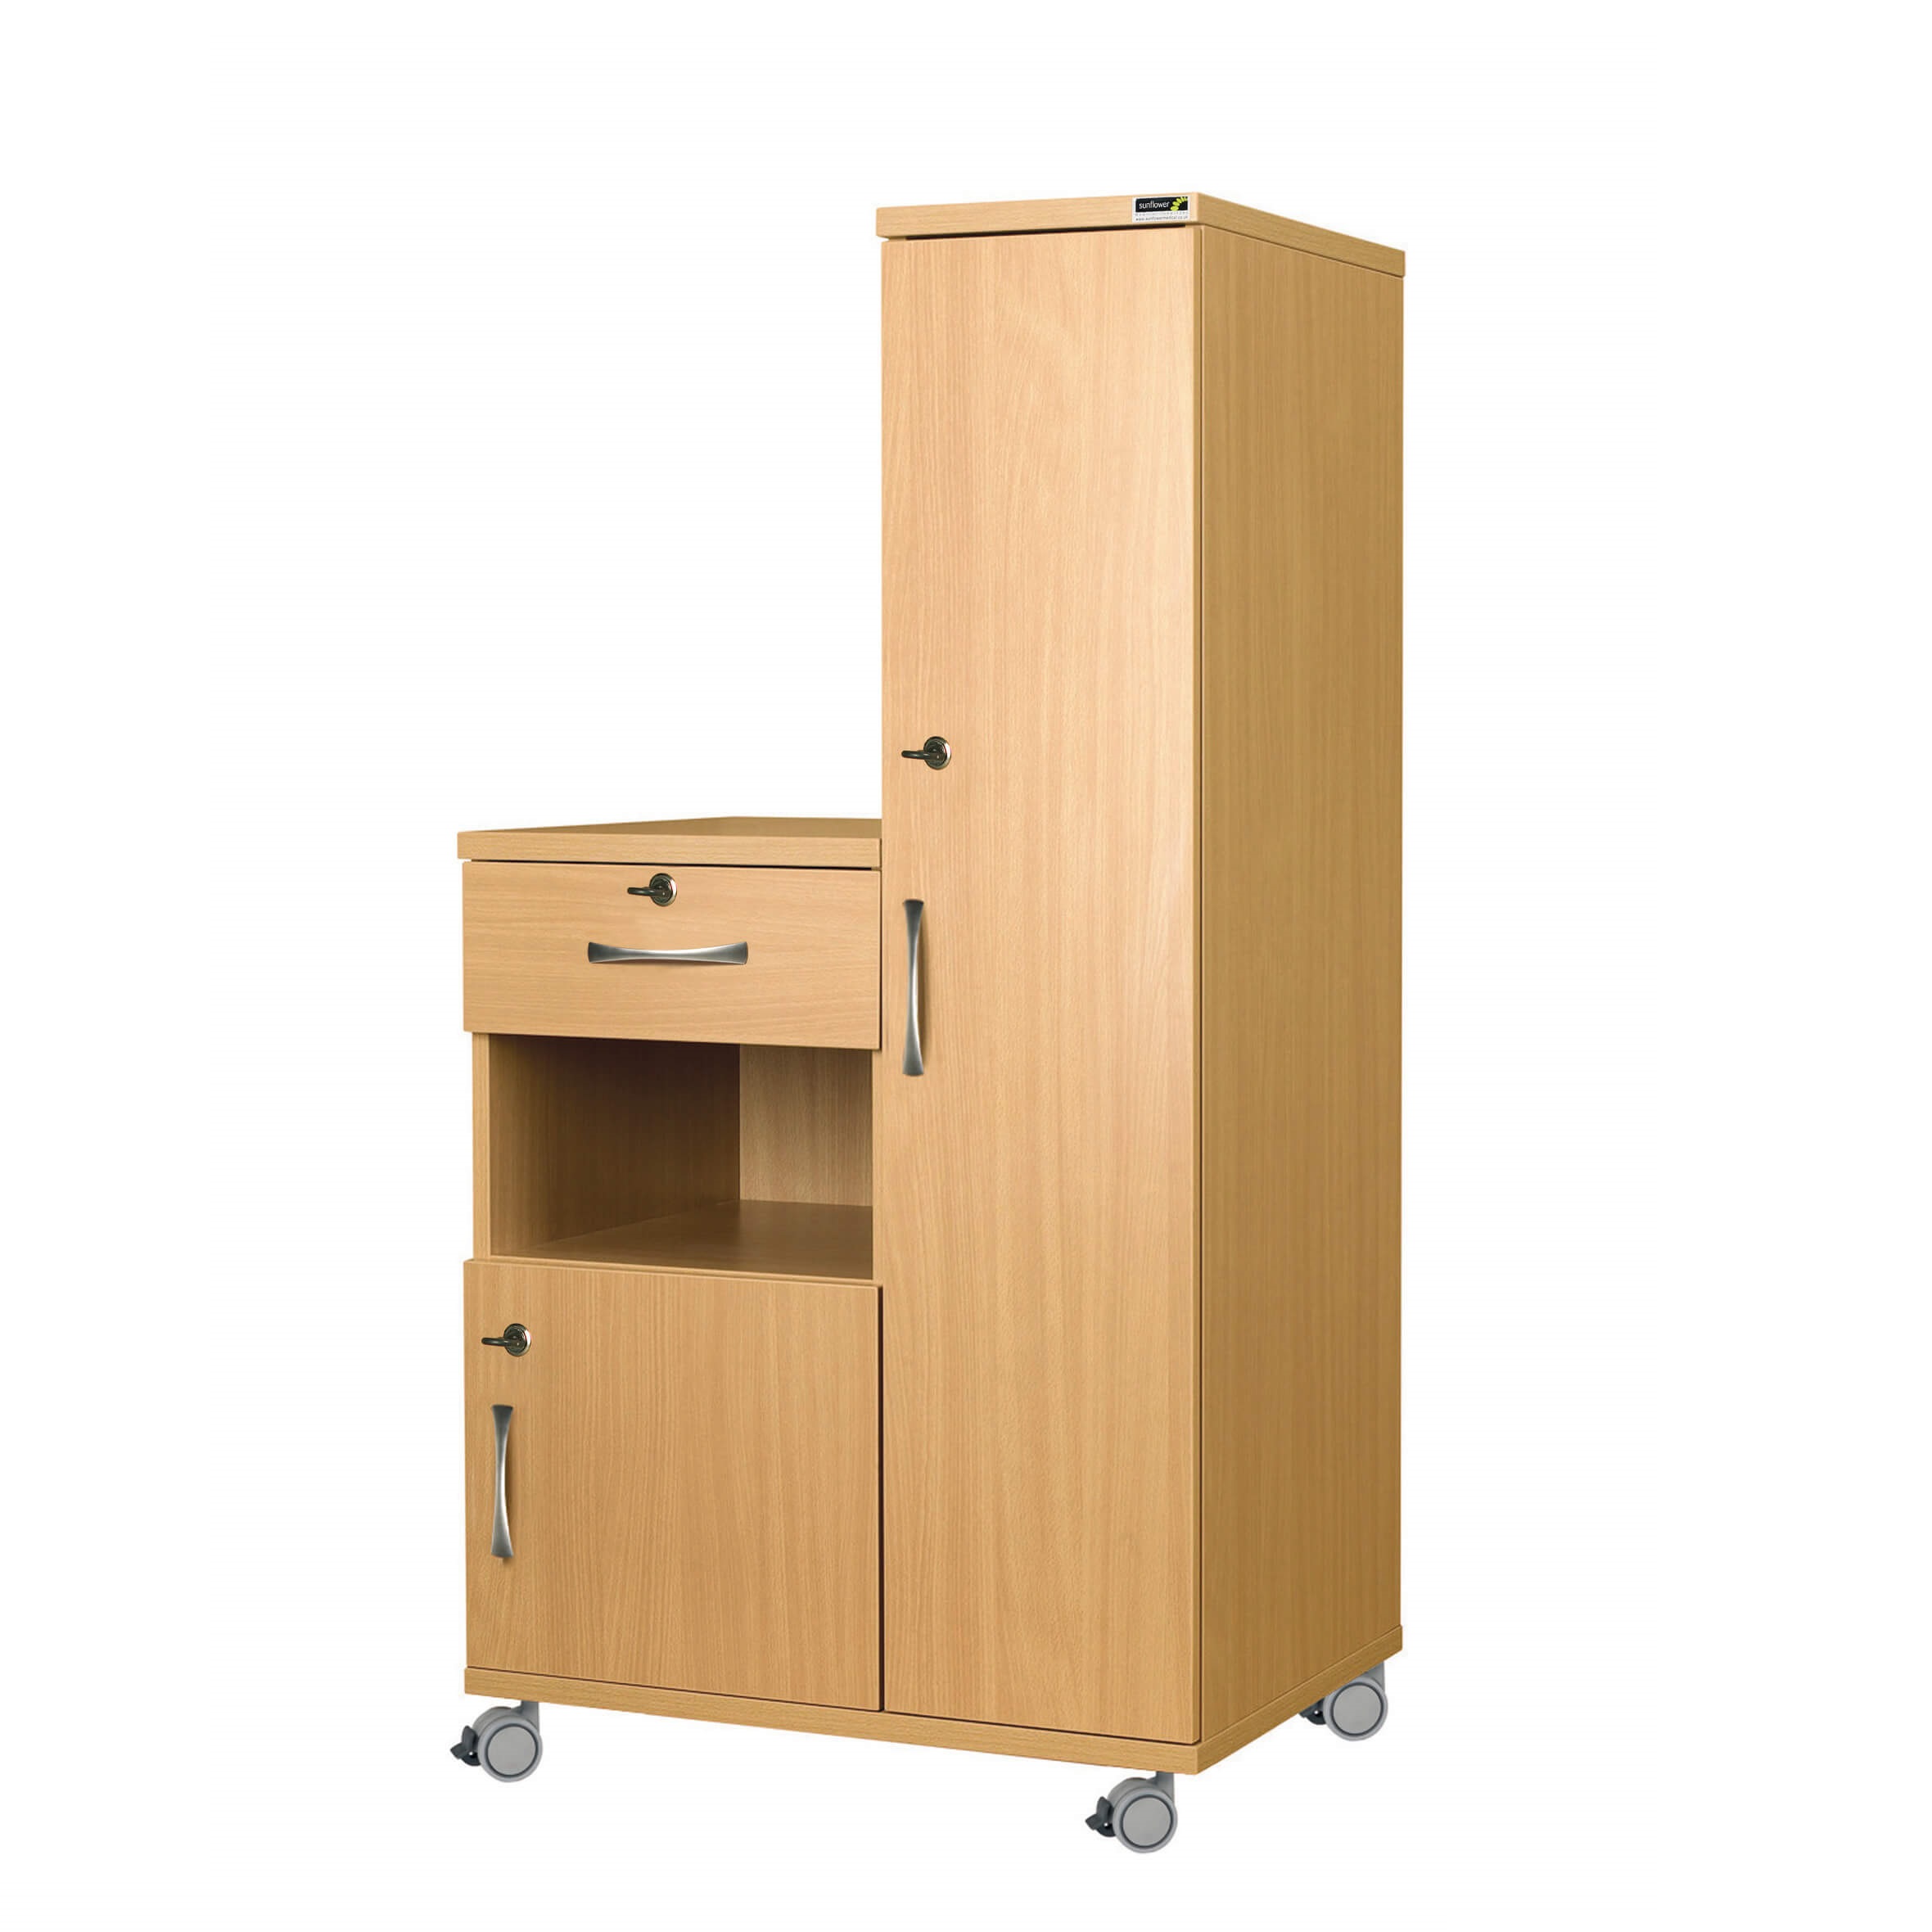 Right Hand Bedside Cabinet Combination Unit with Locks - MFC Material [Sun-CBHBC5-MFC-LOCKS]